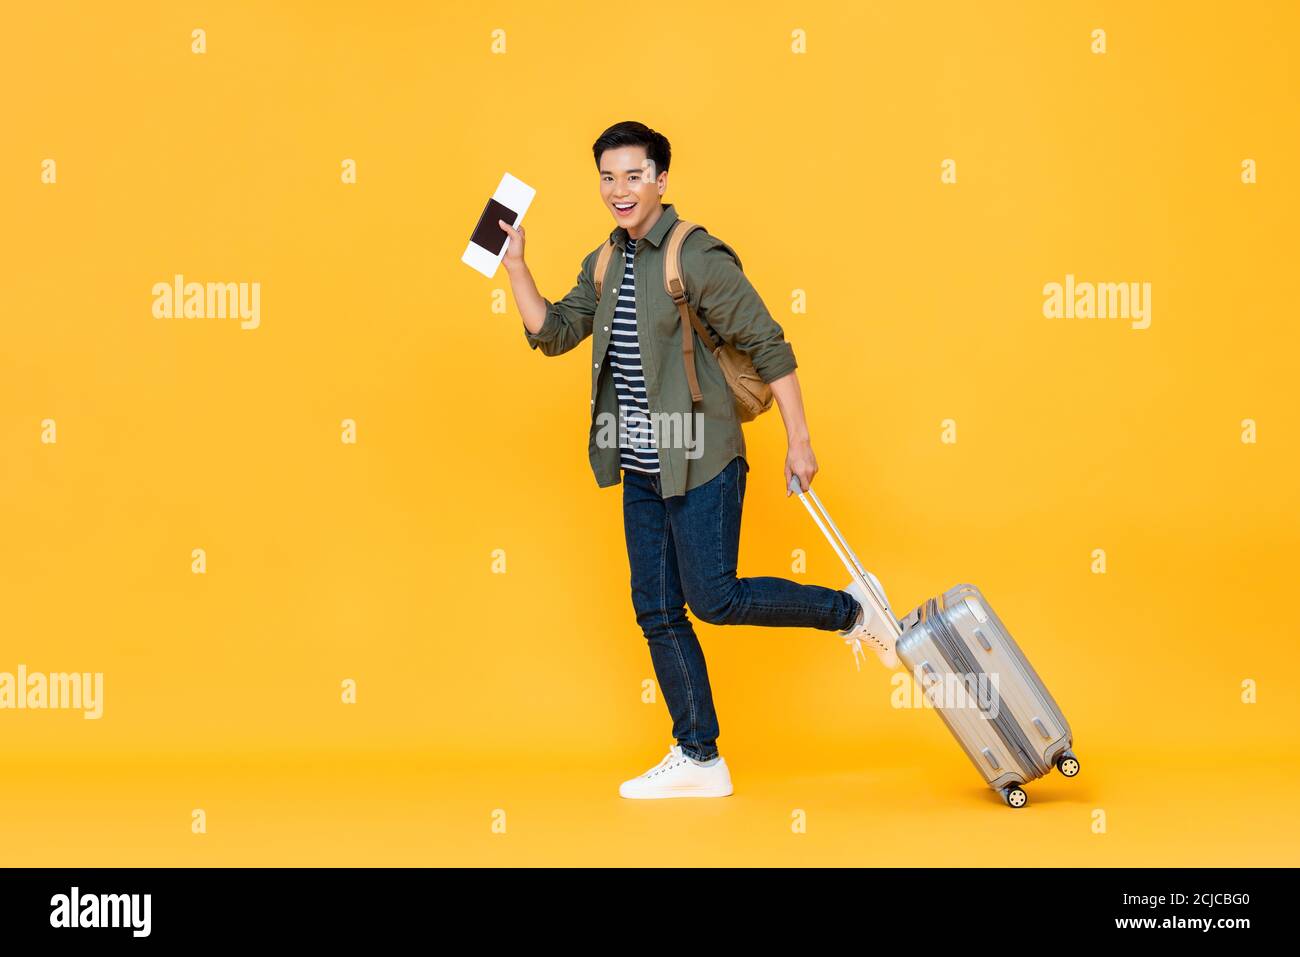 Full length portrait of smiling happy handsome young Asian man tourist with passport and luggage ready to travel on vacations isolated in yellow studi Stock Photo